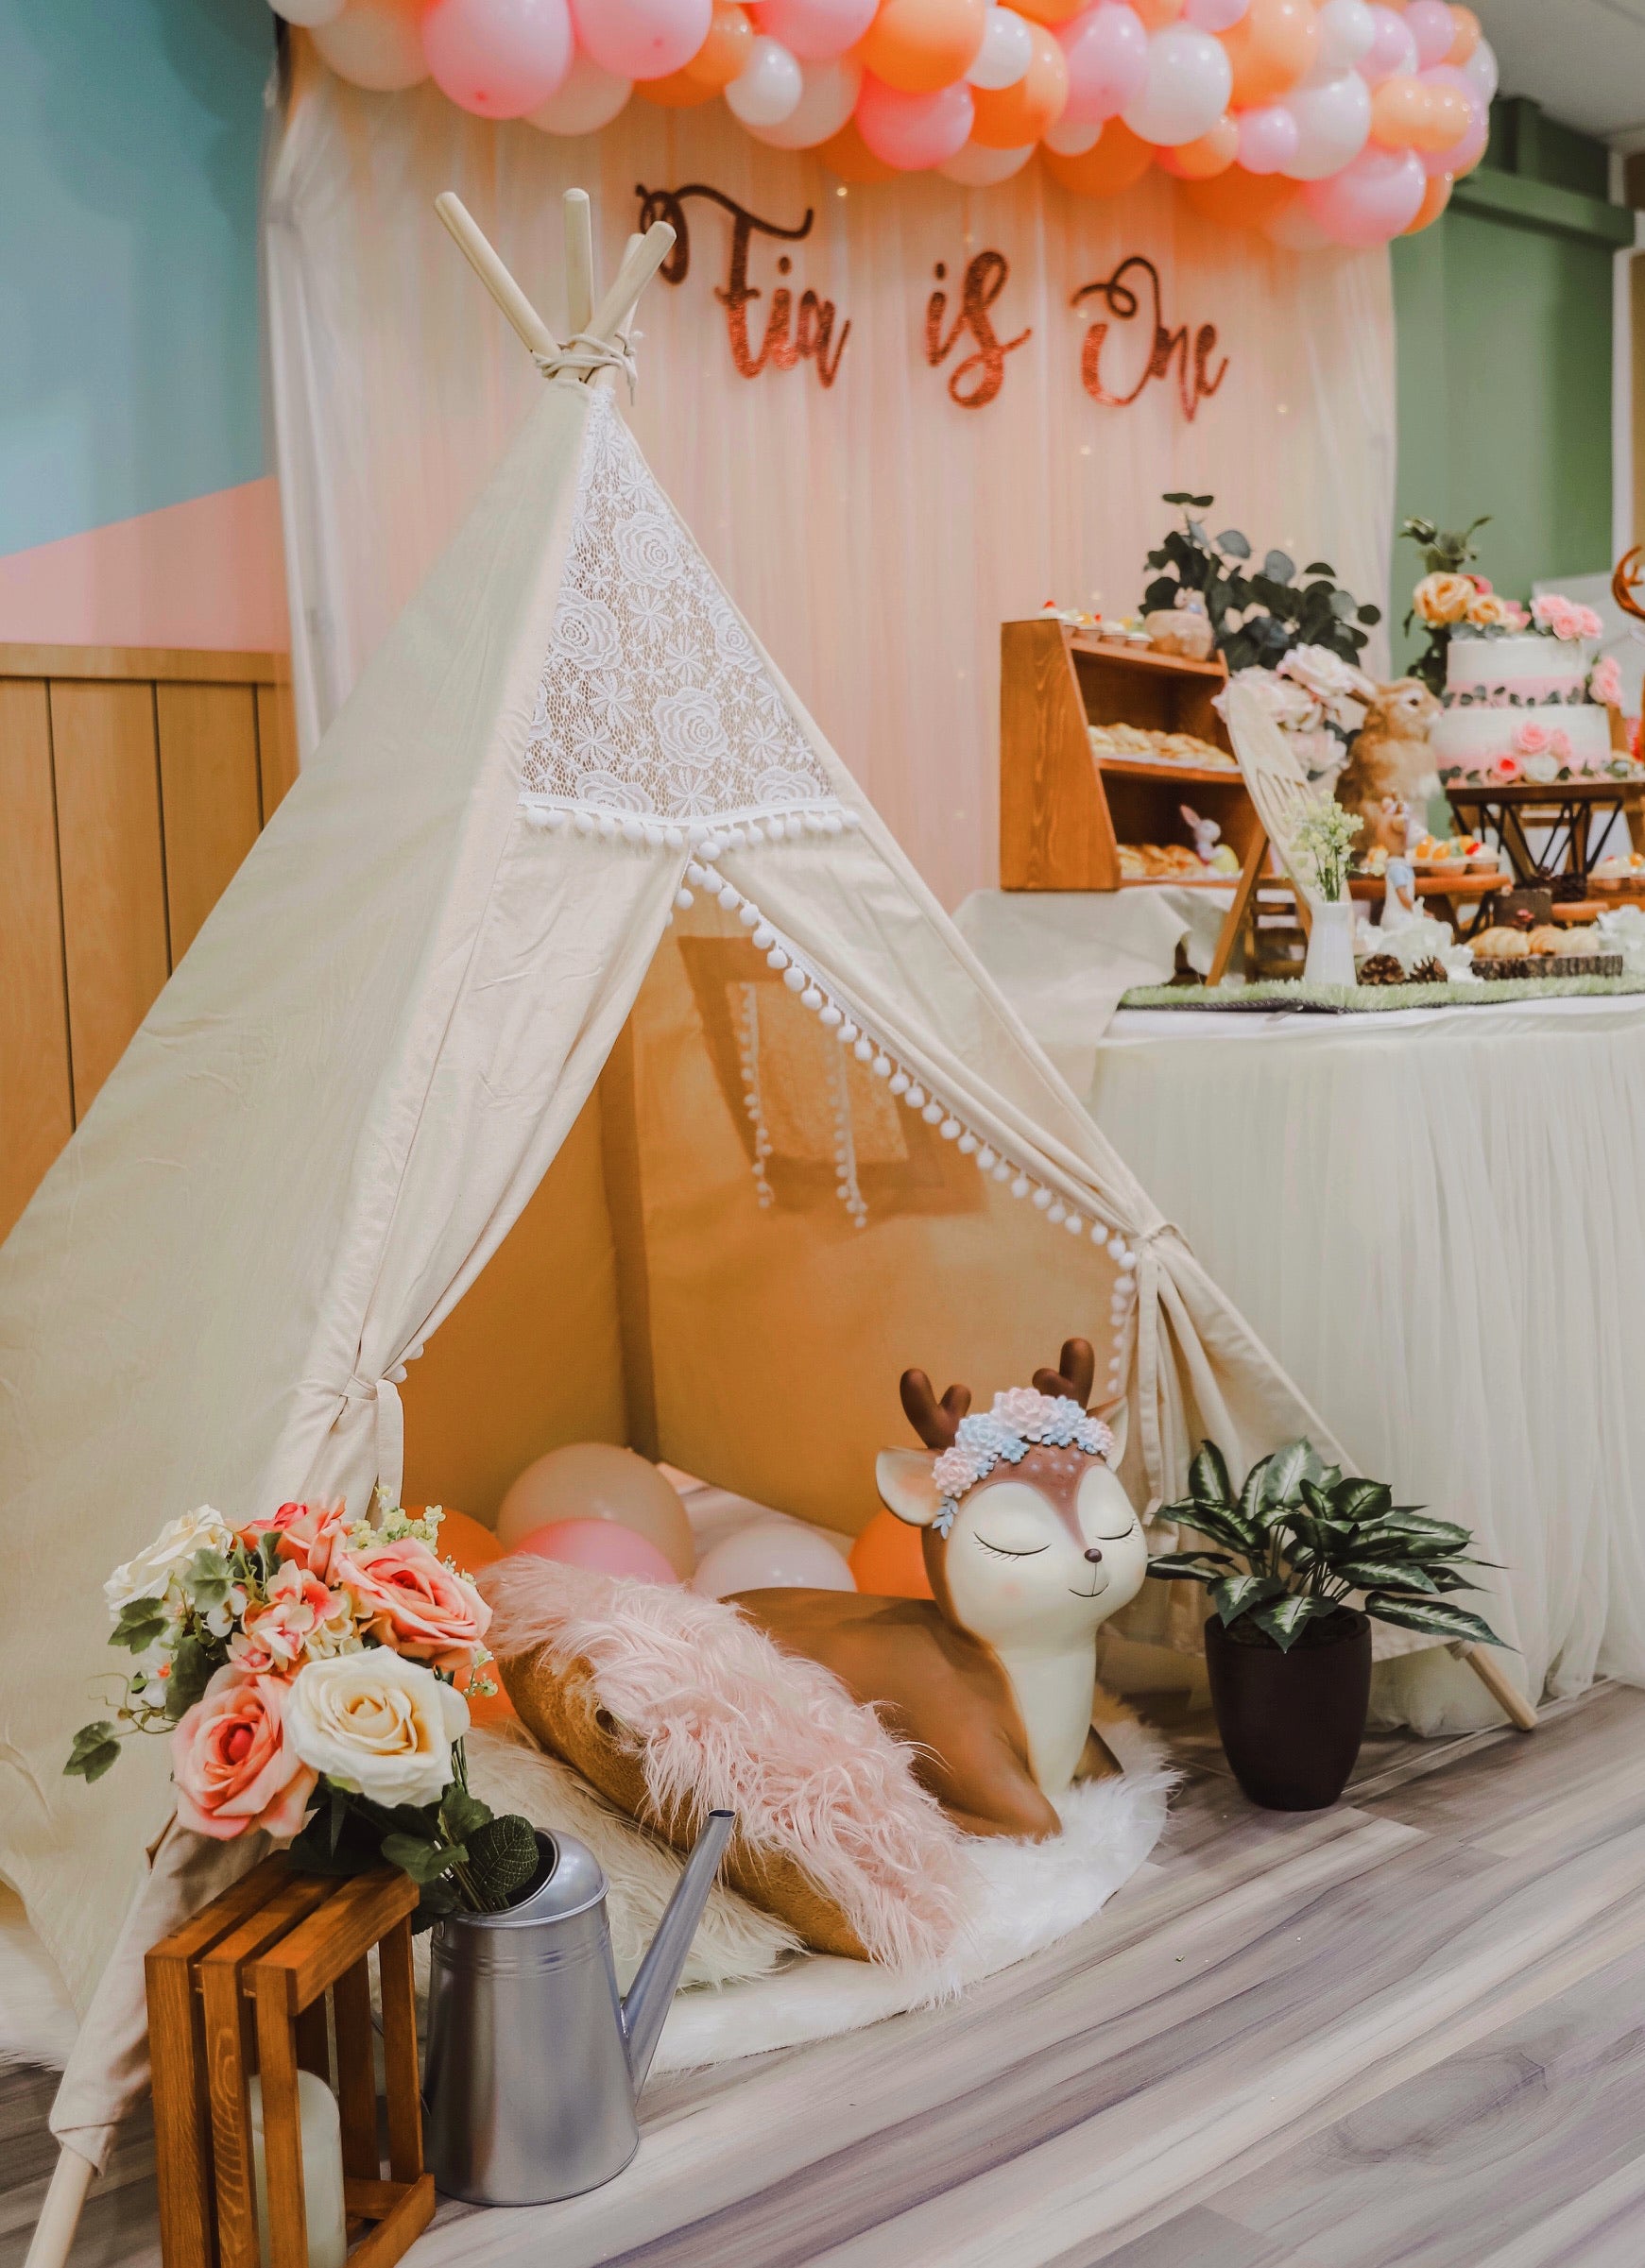 Rustic Lace Teepee Tent*